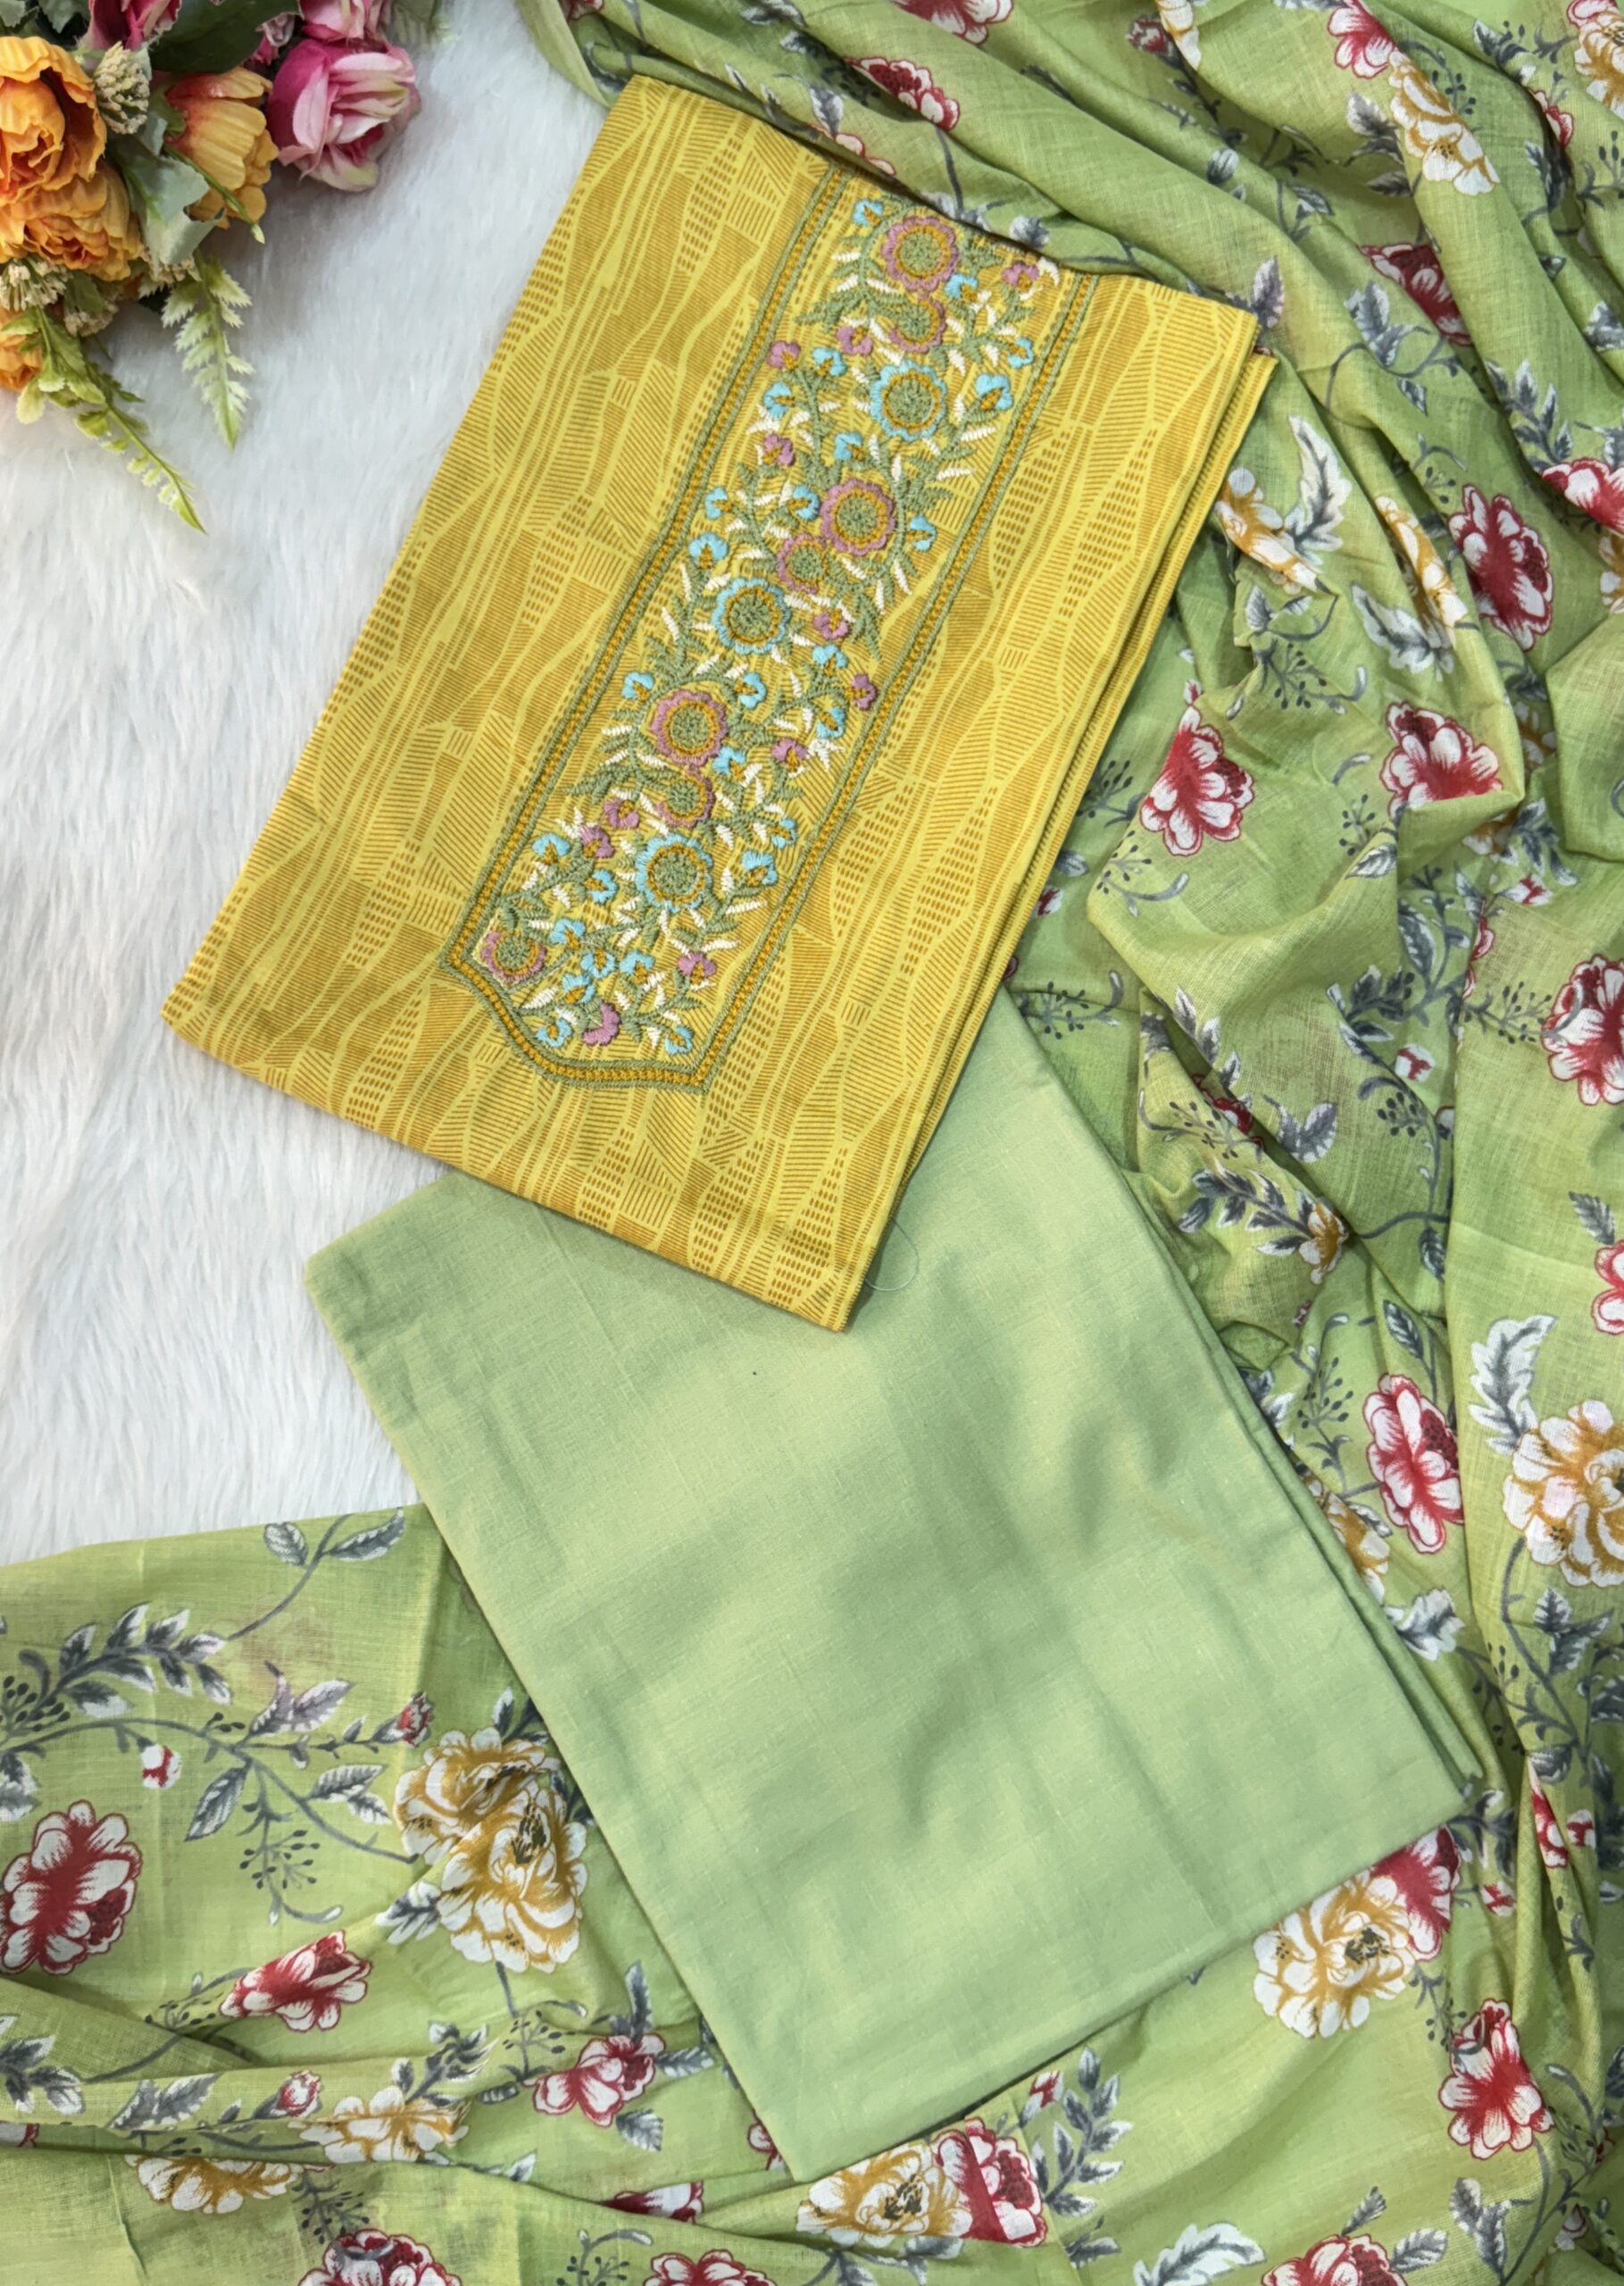 pure cotton material has  embroidery with beautiful designs